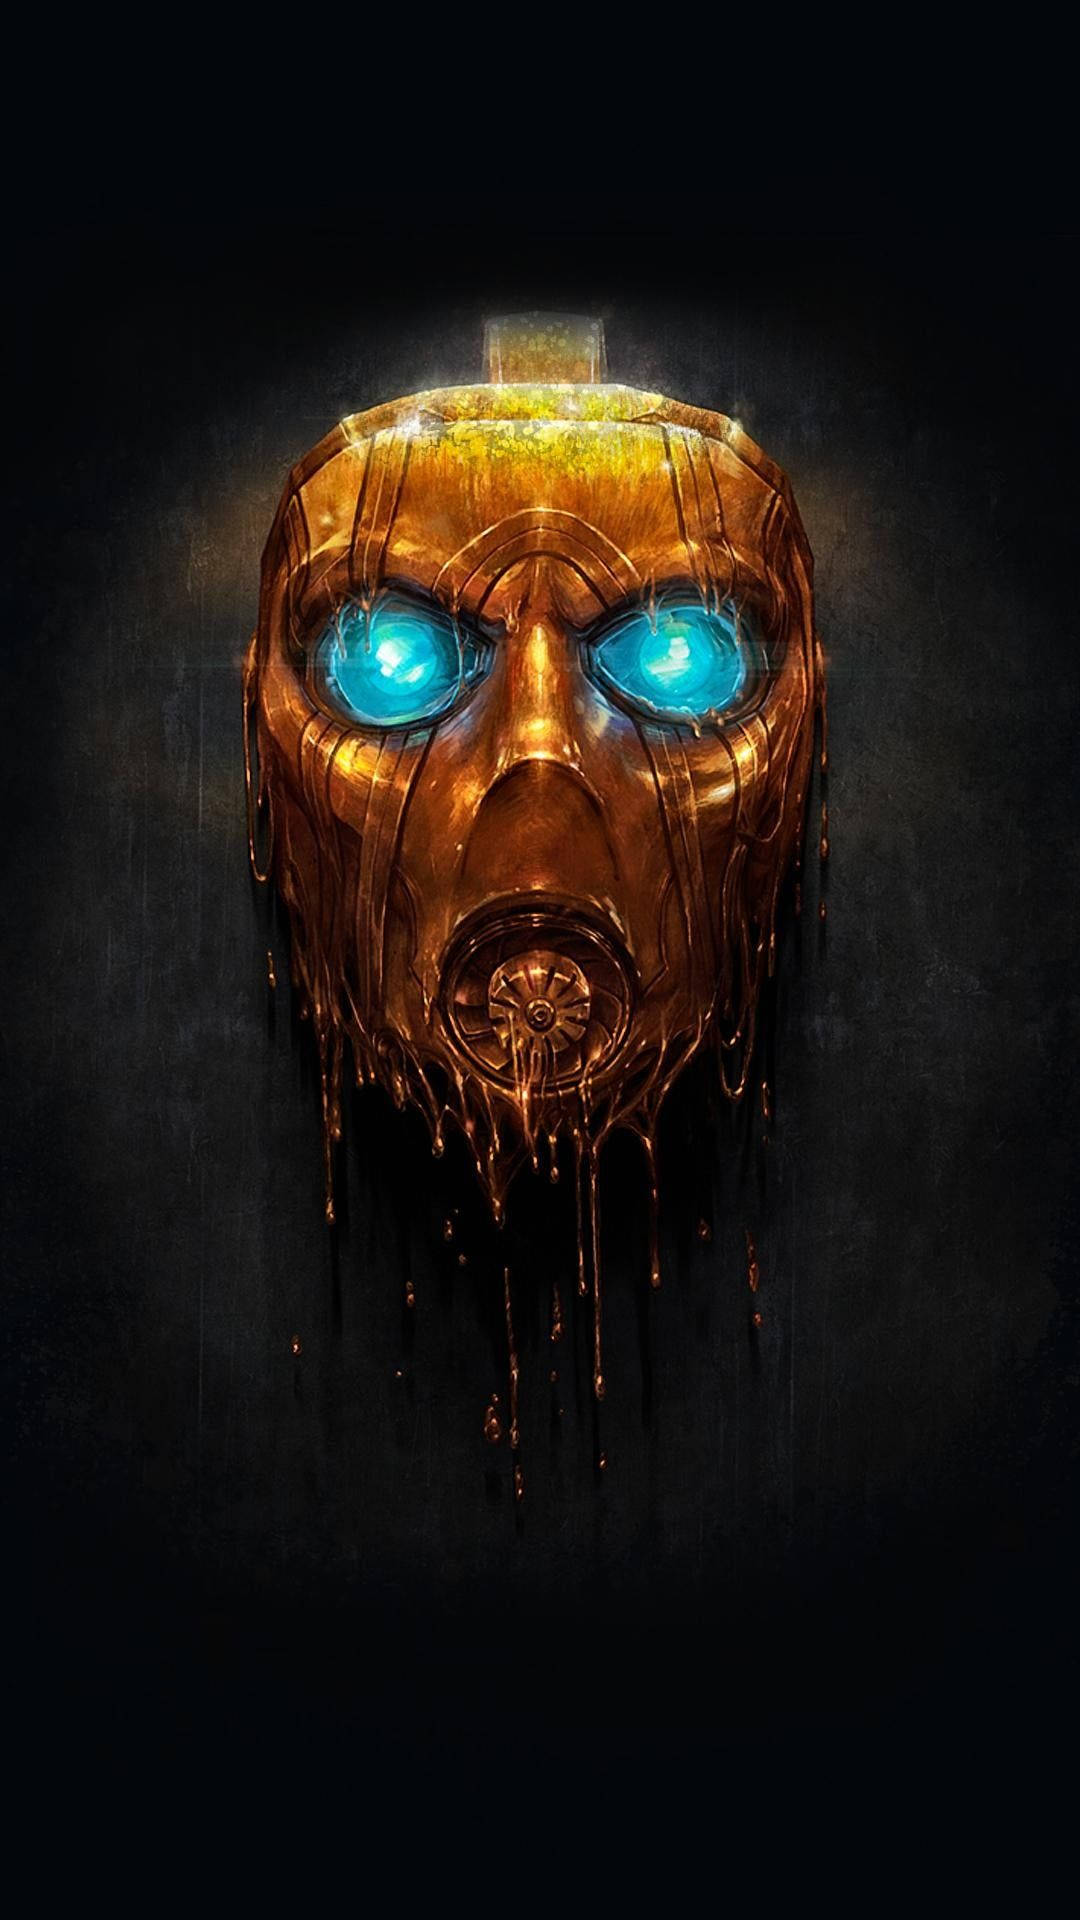 The Iconic Psycho Mask of Borderlands Wallpaper